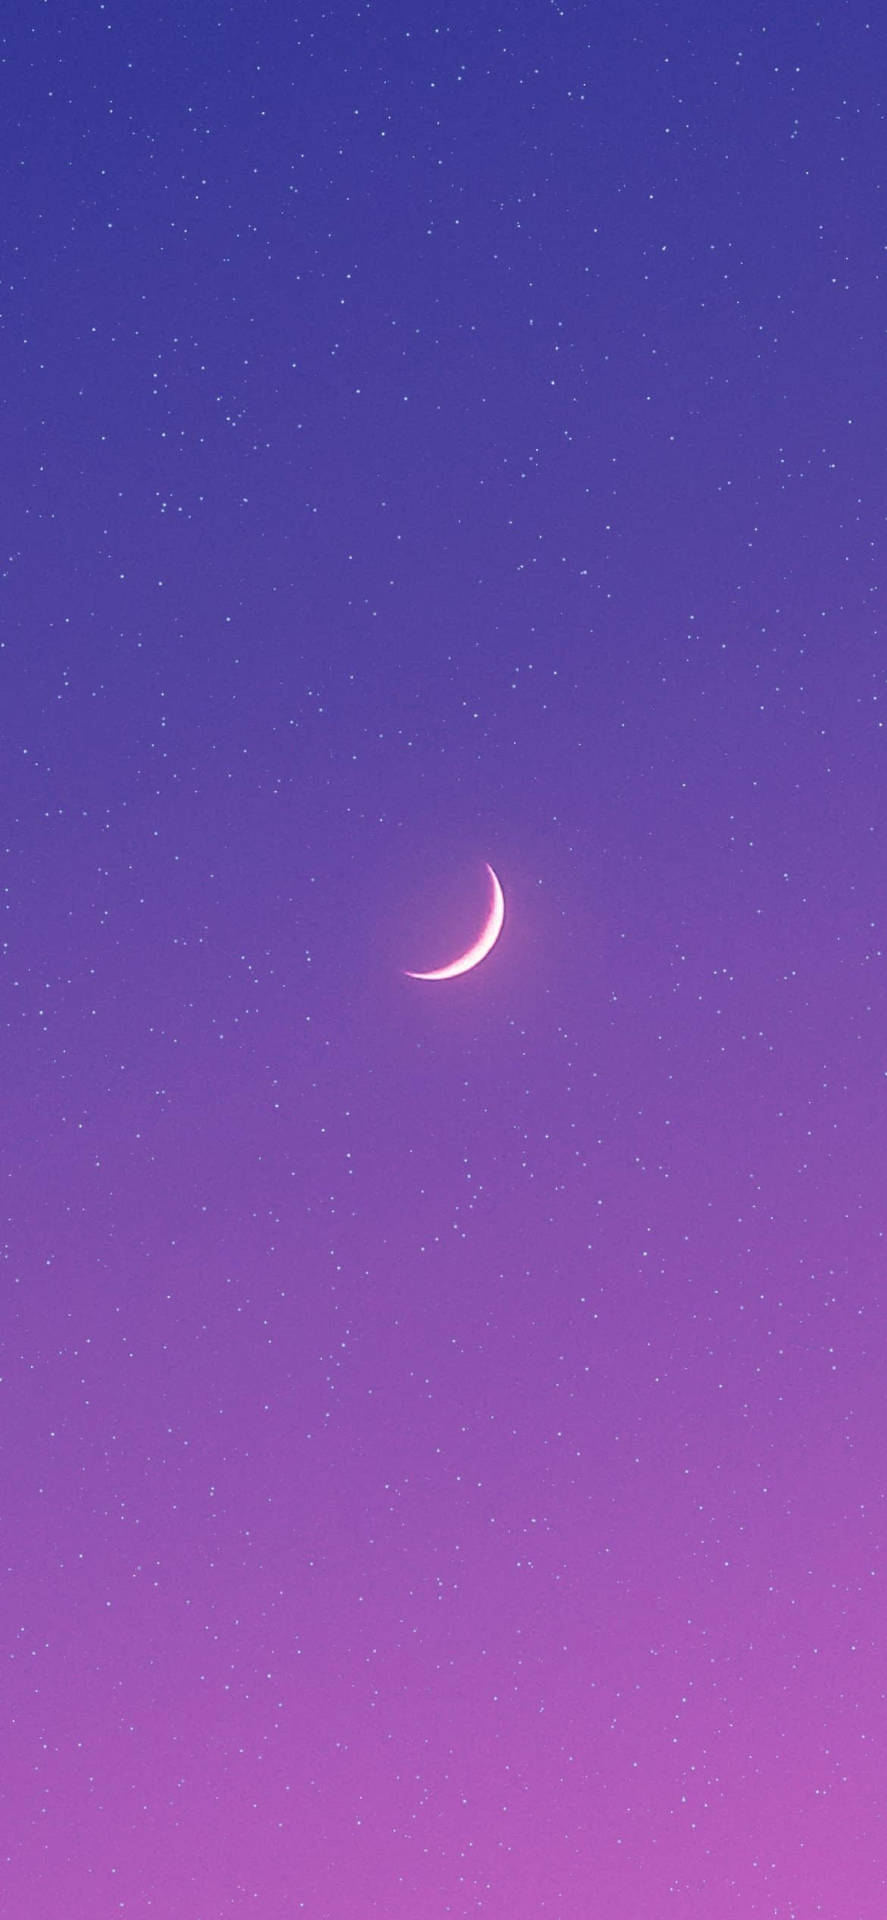 A crescent moon is in the sky - Moon